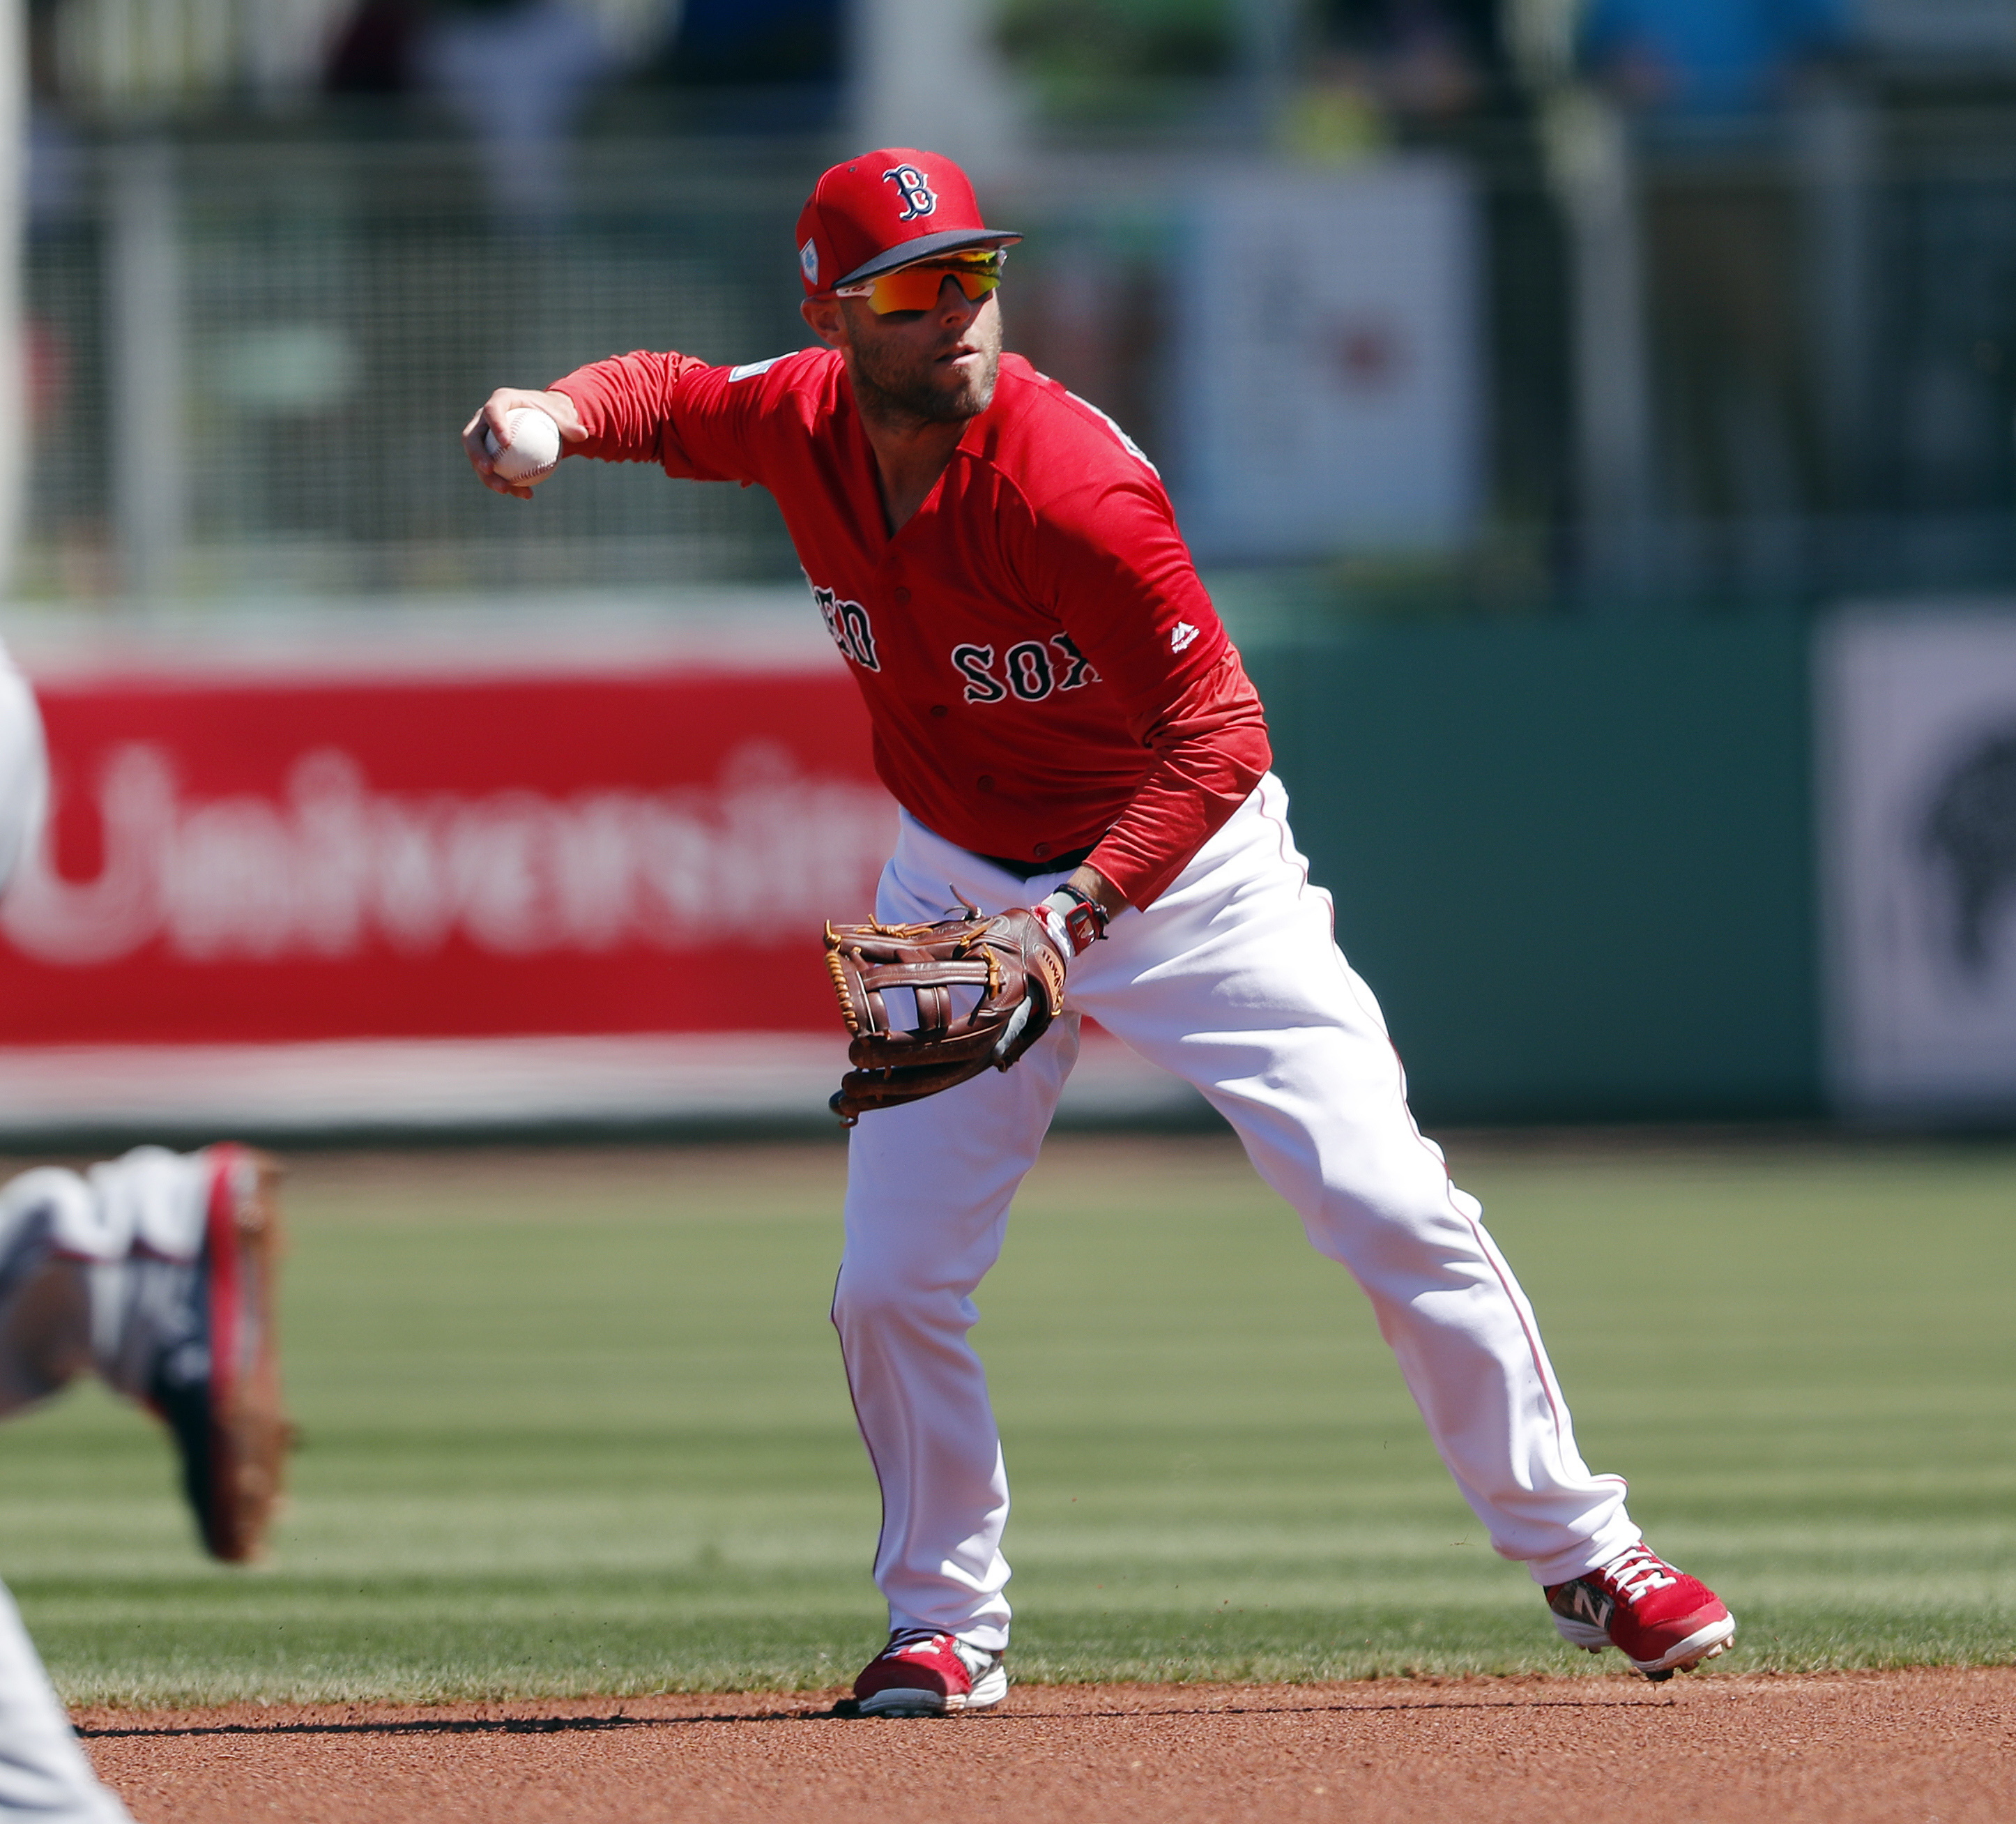 Dustin Pedroia plays inning in 1st game since May